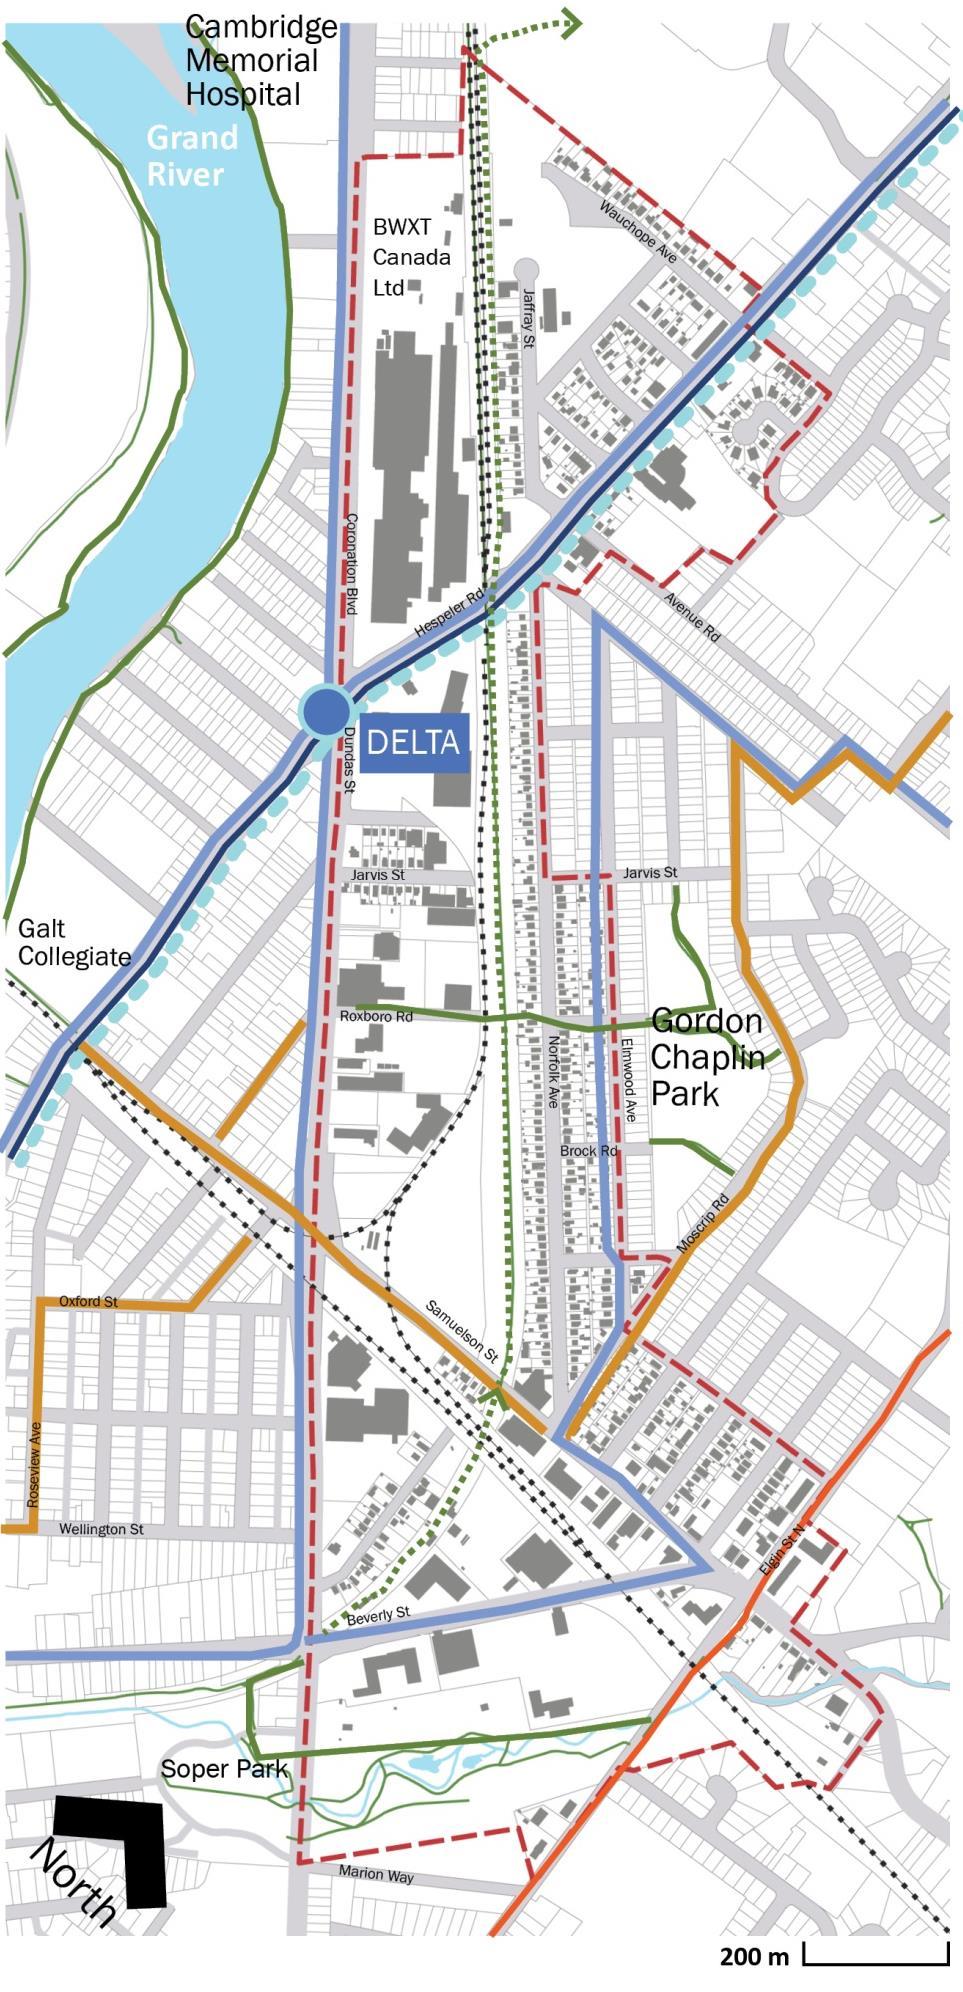 CORONATION BOULEVARD AND DUNDAS ST. NORTH SECONDARY PLAN TRANSPORTATION PLANNING CONTEXT Stage 2 of the ION expansion plan includes connections to the Coronation Boulevard and Dundas St.